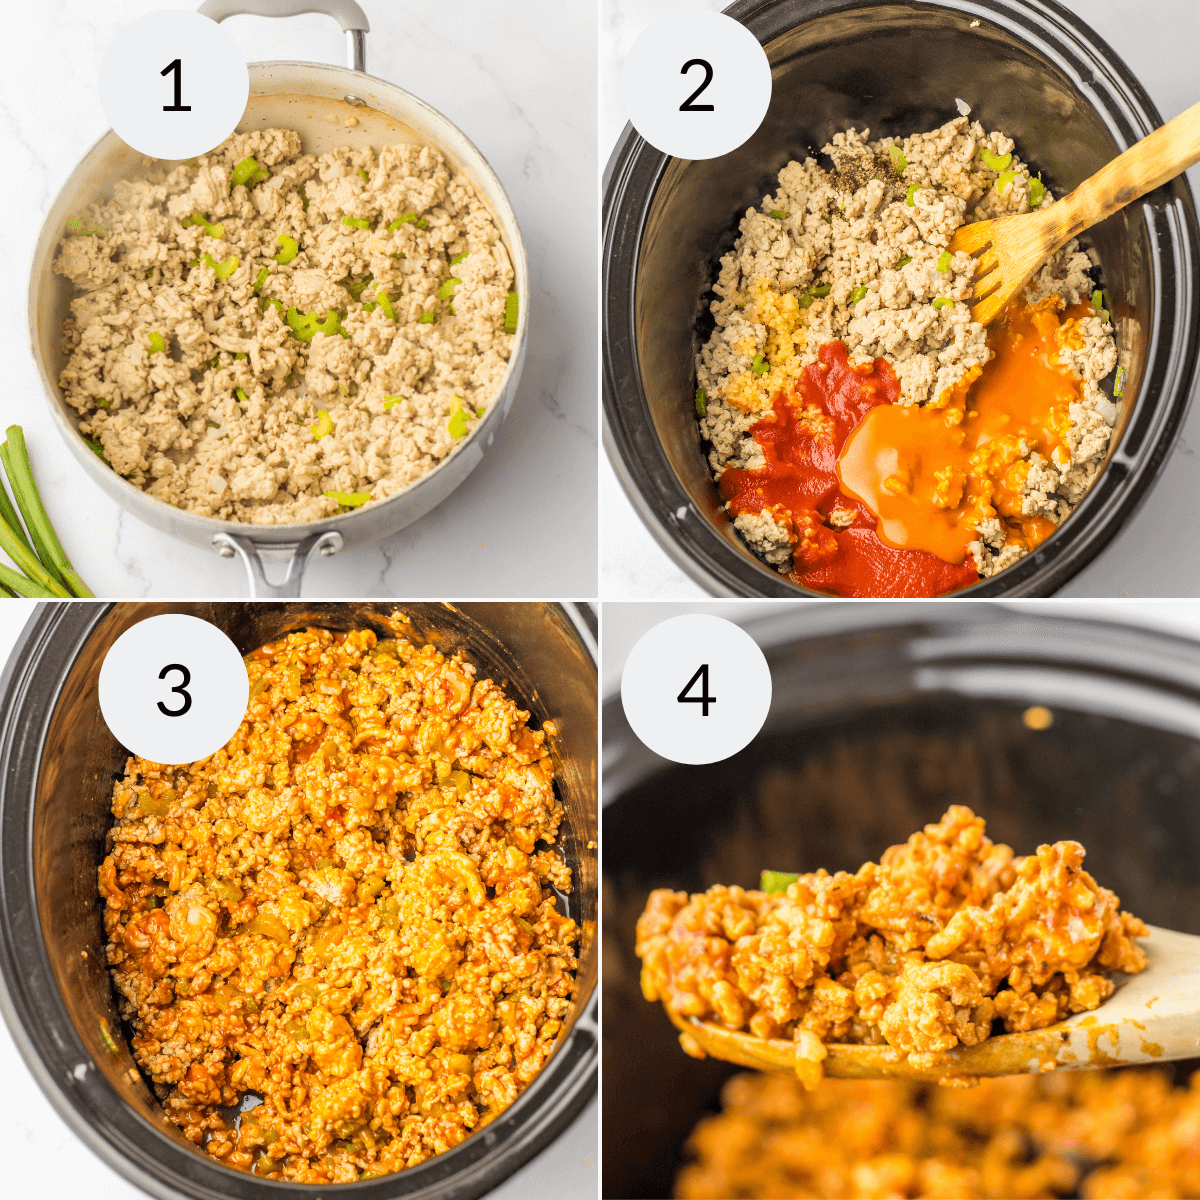 Four-step slow cooker cooking process showing the preparation of a buffalo chicken sloppy joes dish with vegetables and sauce.